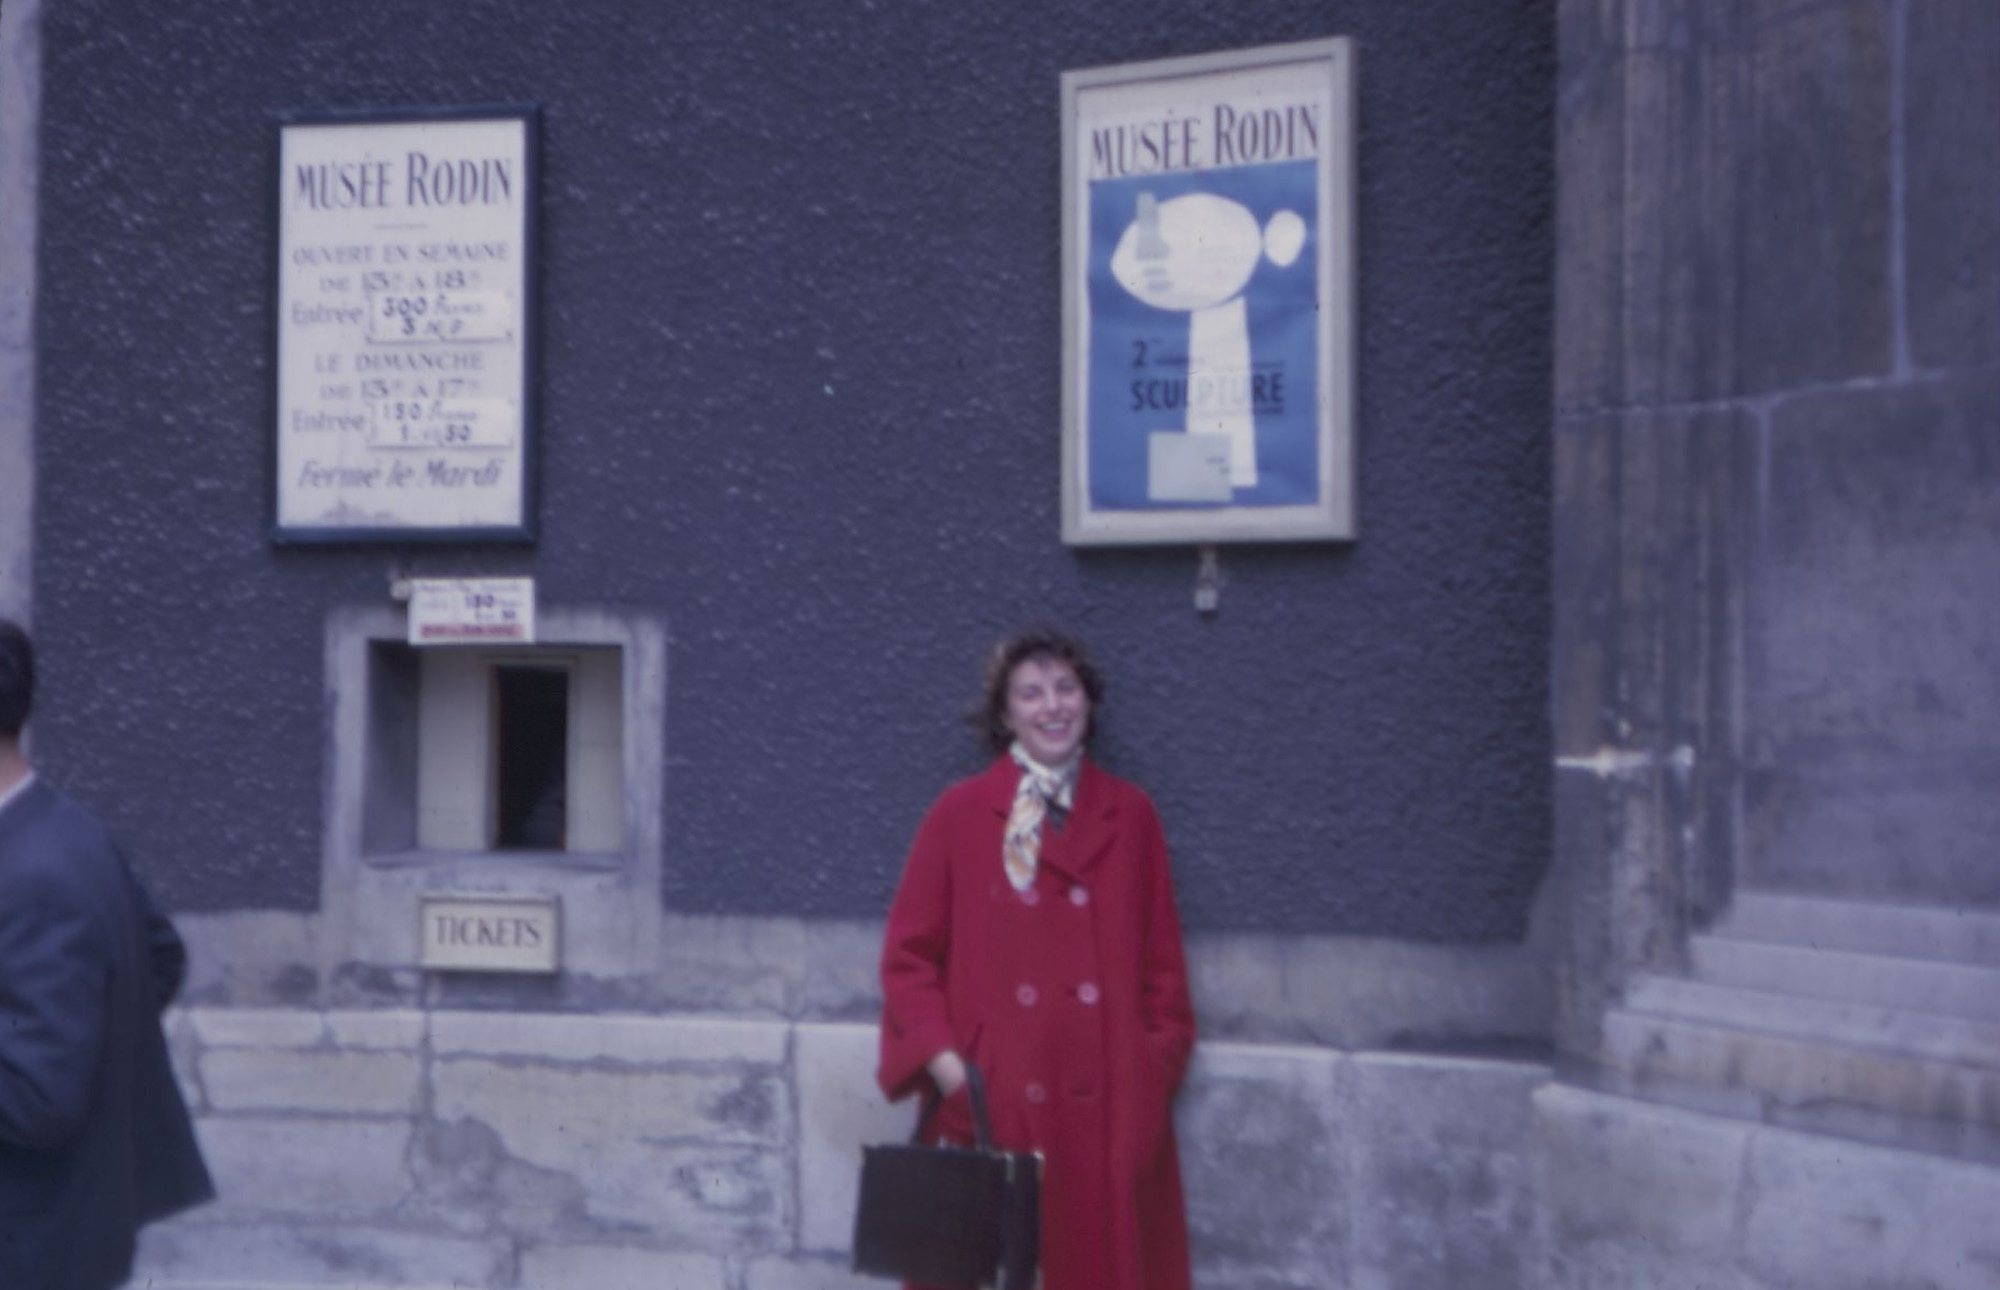 Helen Frankenthaler smiling in a red coat outside the Musee Rodin, Paris, 1961